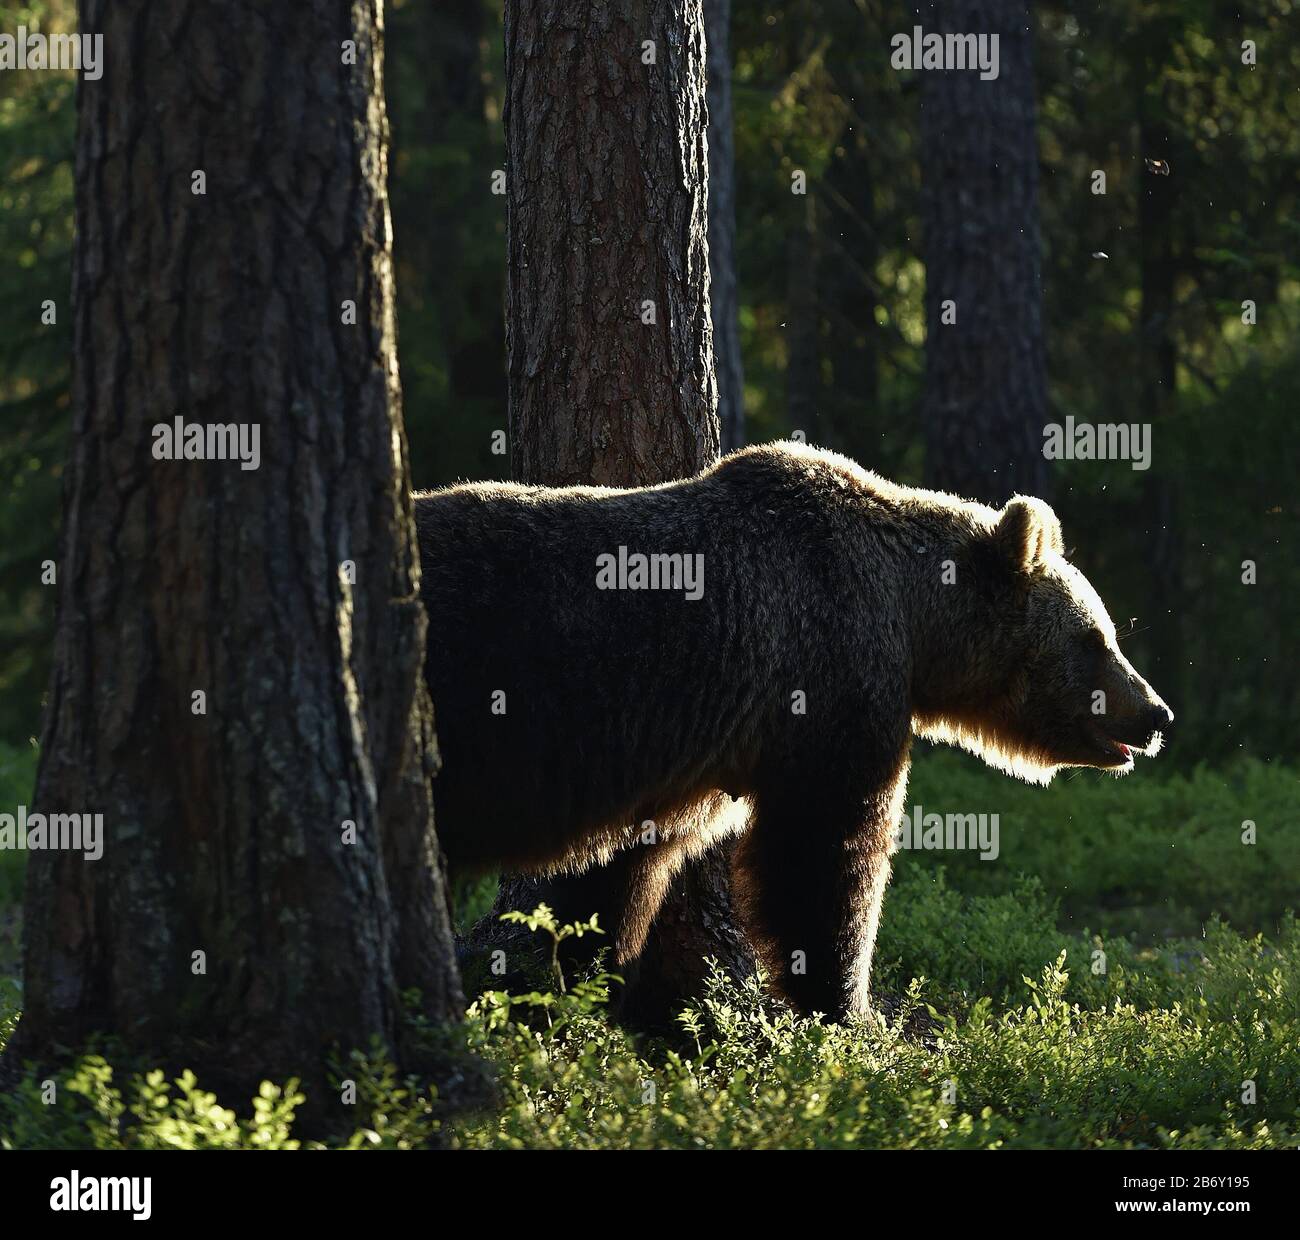 Backlit brown bear. Bear against a sun. Brown bear in back light. Lit by evening sun at summer forest. Stock Photo